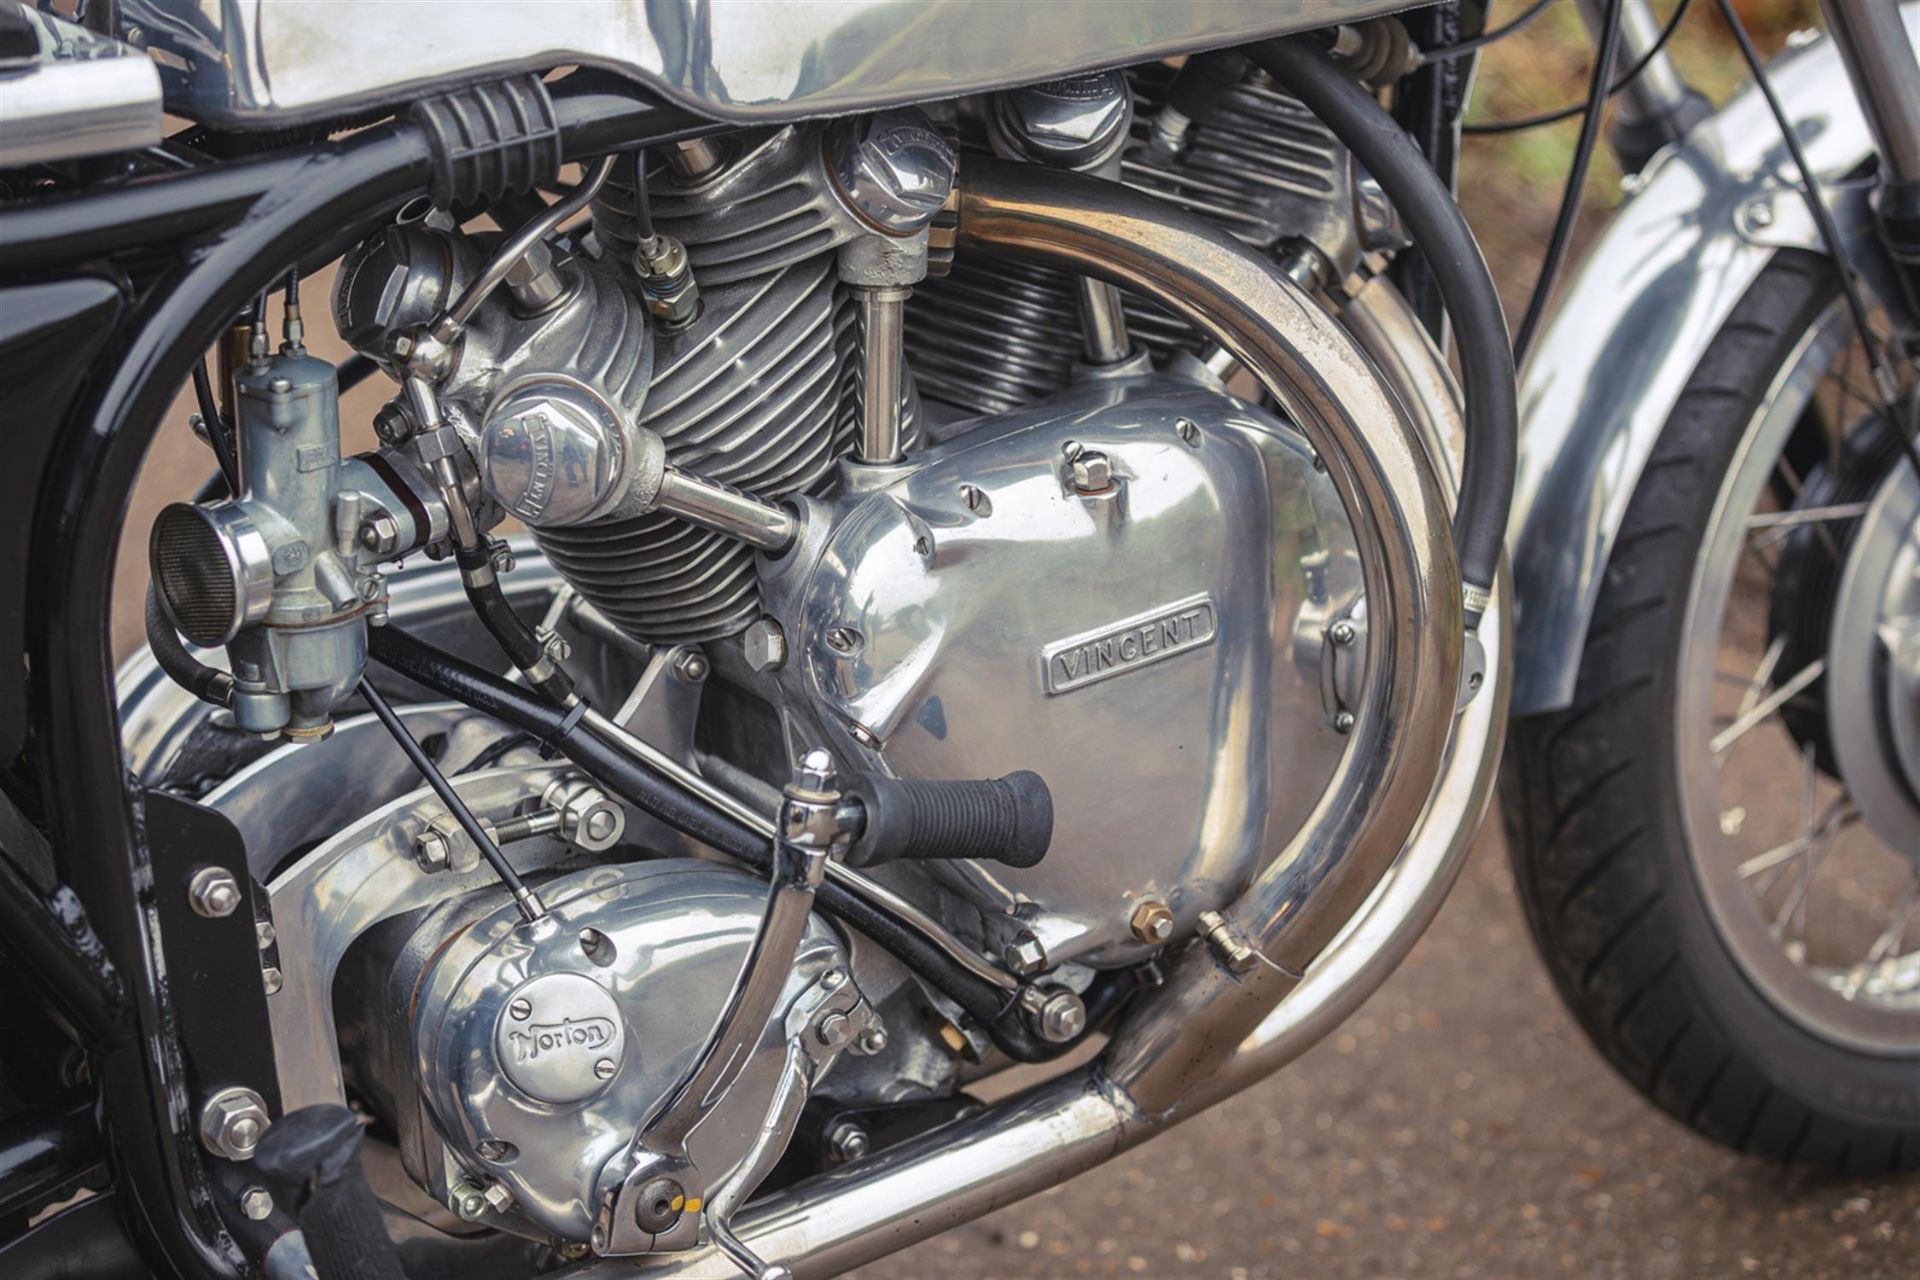 1958 Norvin Cafe Racer 1000cc - Image 3 of 10